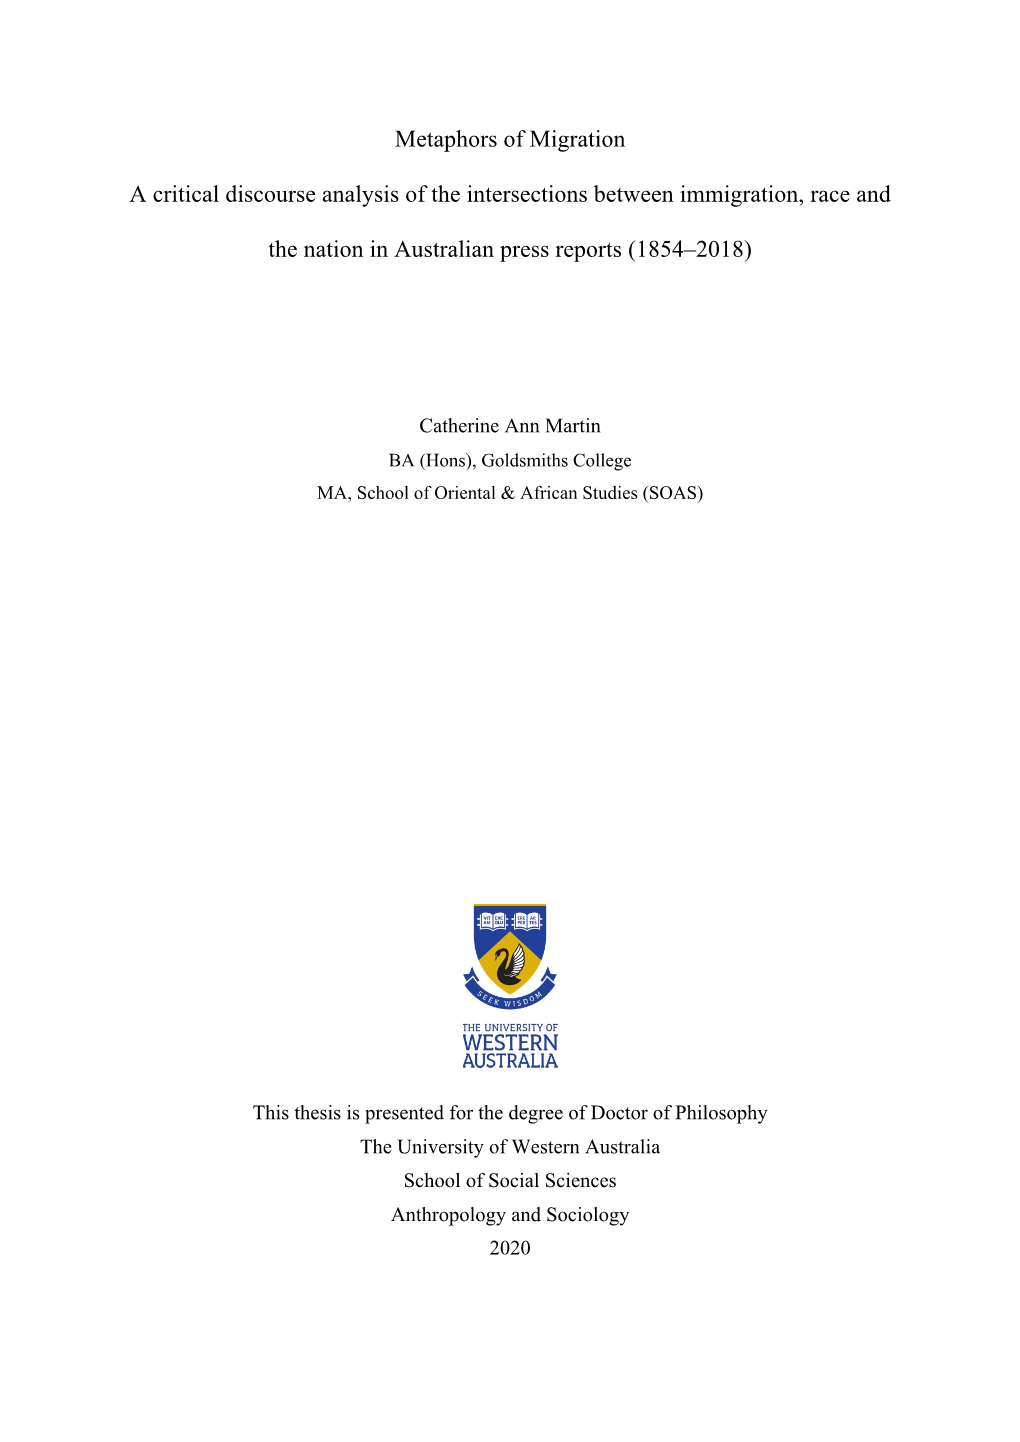 Catherine Martin Thesis Revised